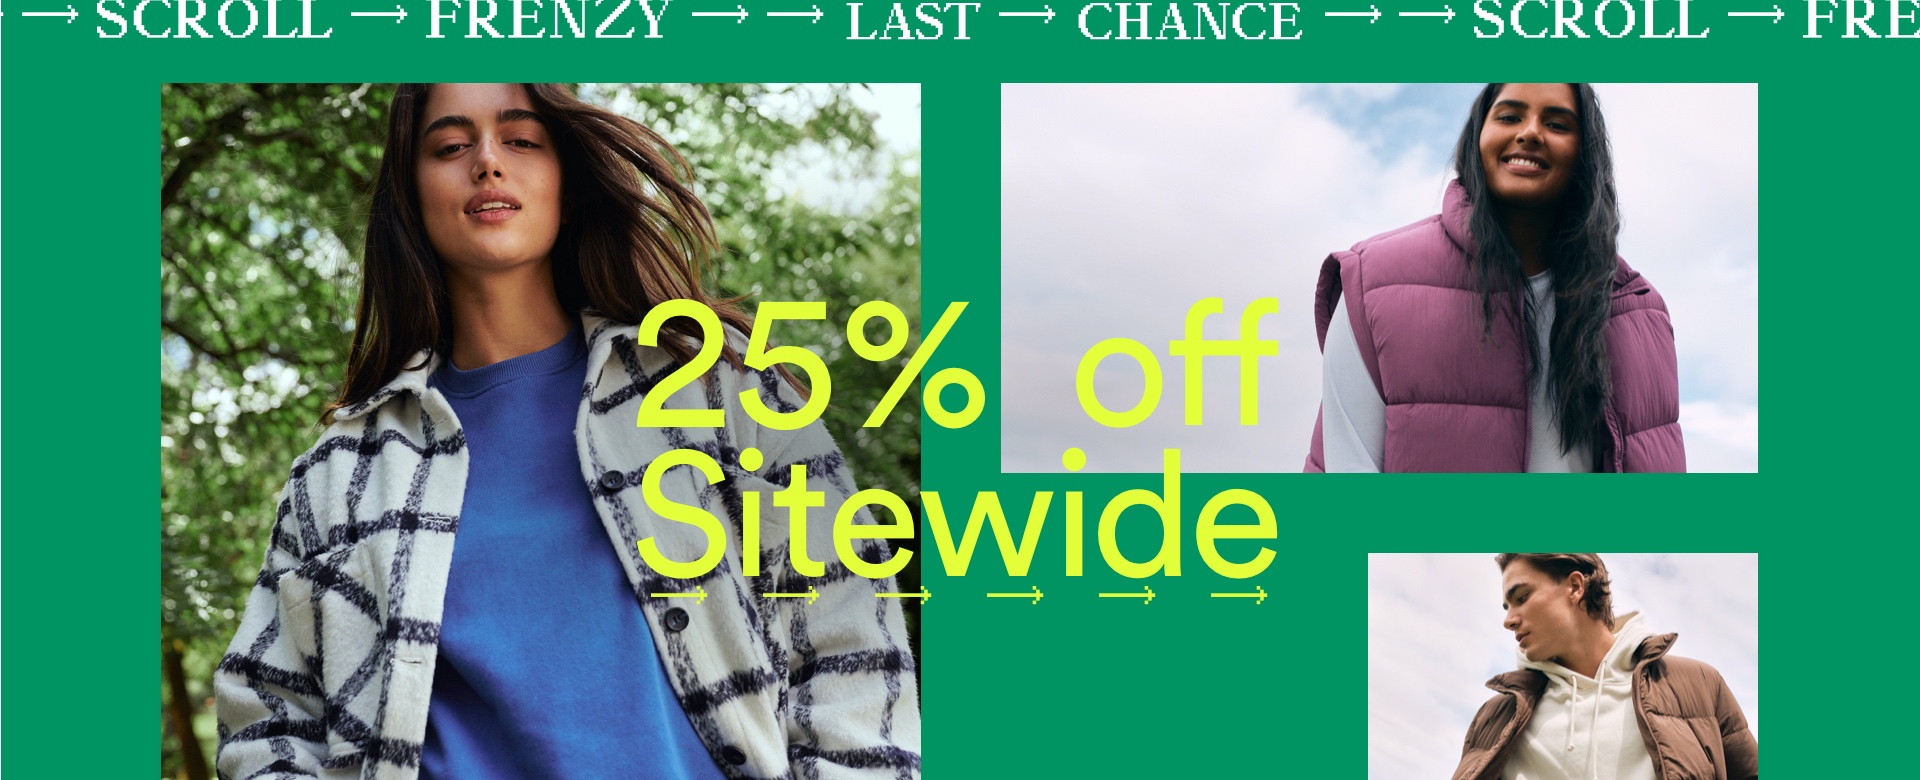 Scroll Frenzy. Last Chance. 25% Off Sitewide. Click To Shop Women's